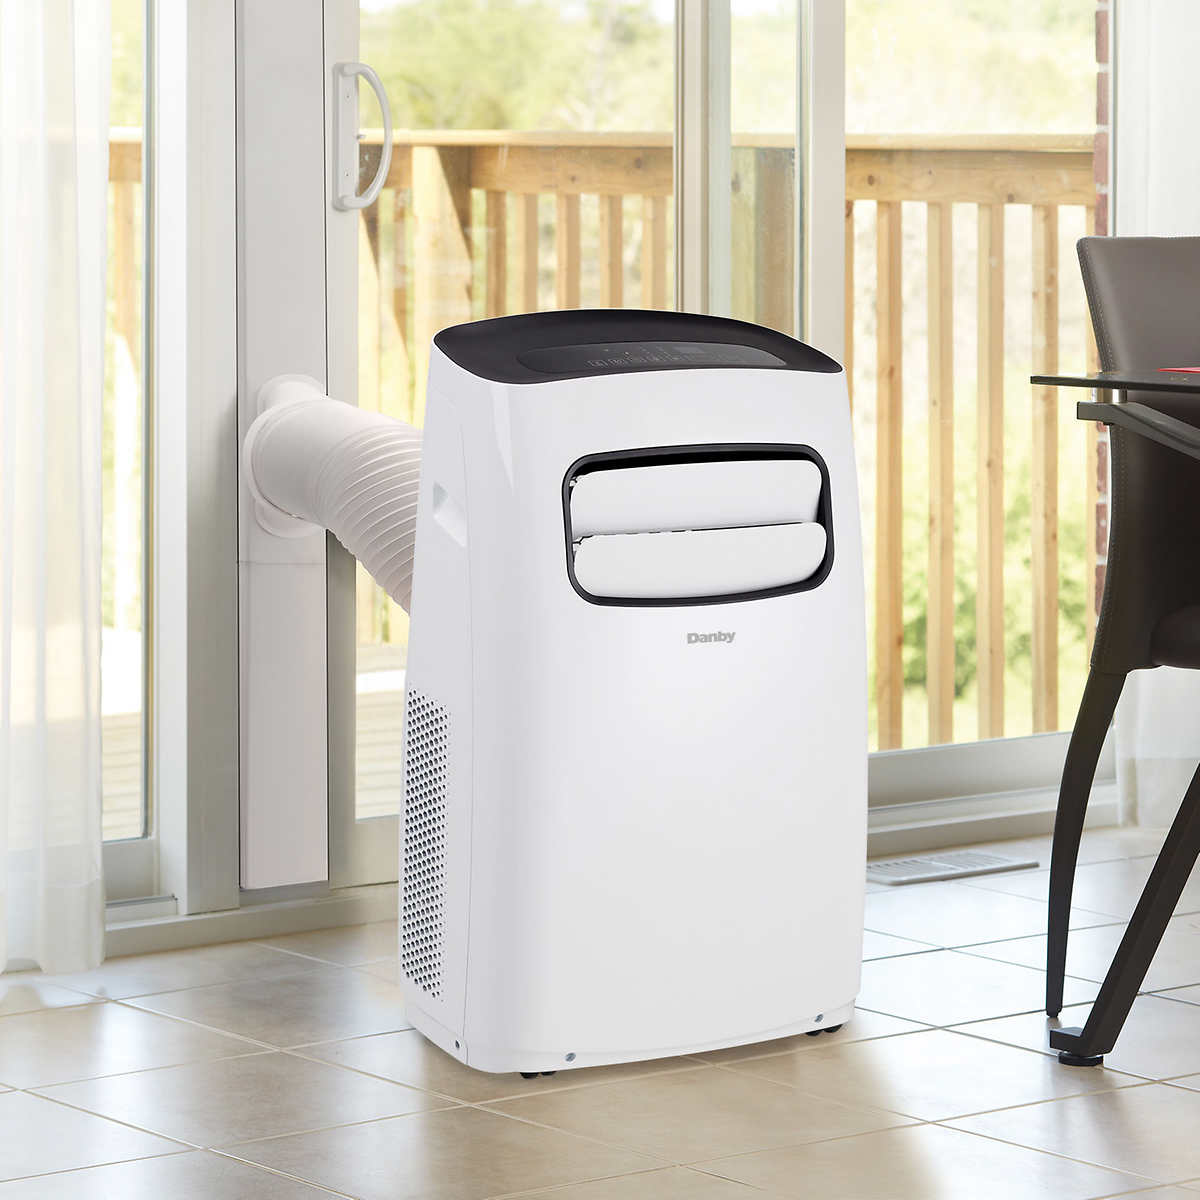 Portable Air Conditioning Equipment Can - Developing Your Own List Of ...